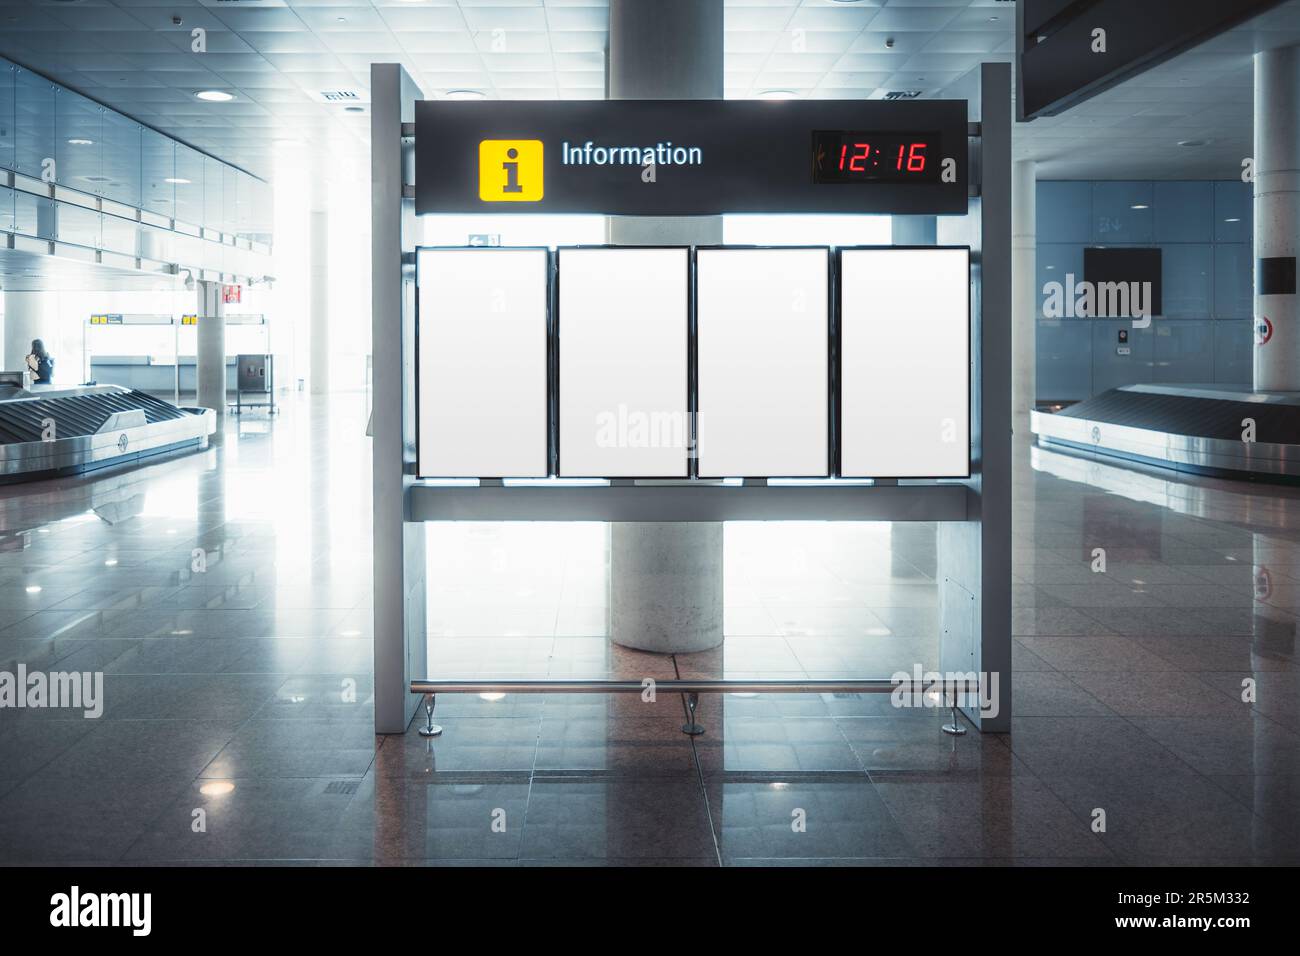 Empty flight information mock-up boards in Barcelona airport. Standing against a column, bathed in bright white light, awaiting passengers' attention Stock Photo